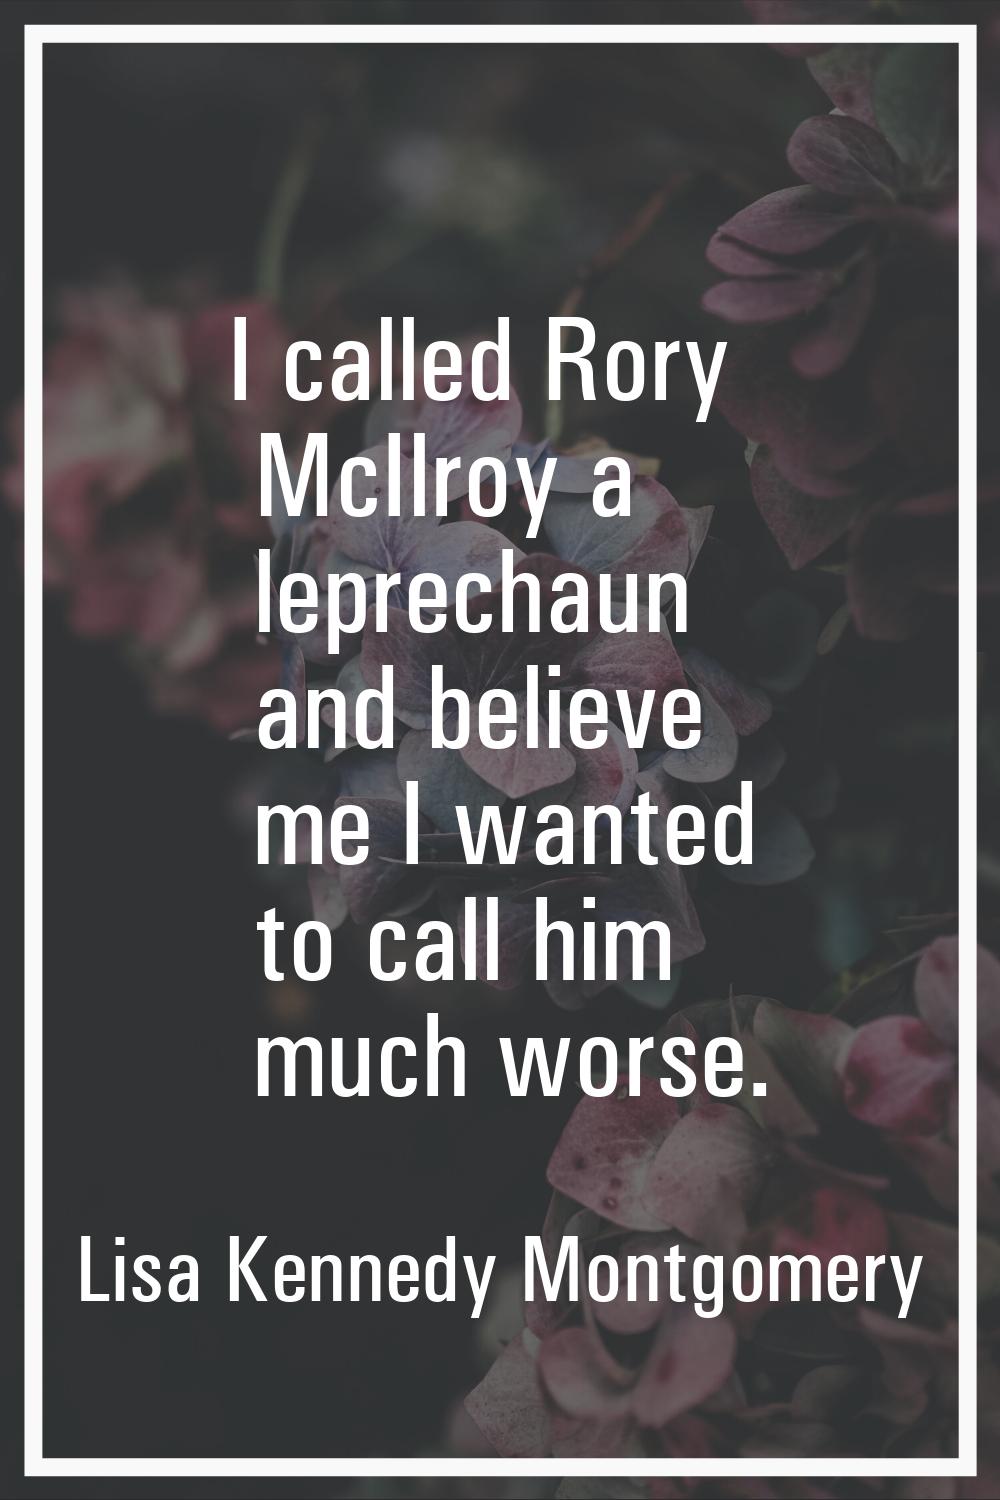 I called Rory McIlroy a leprechaun and believe me I wanted to call him much worse.